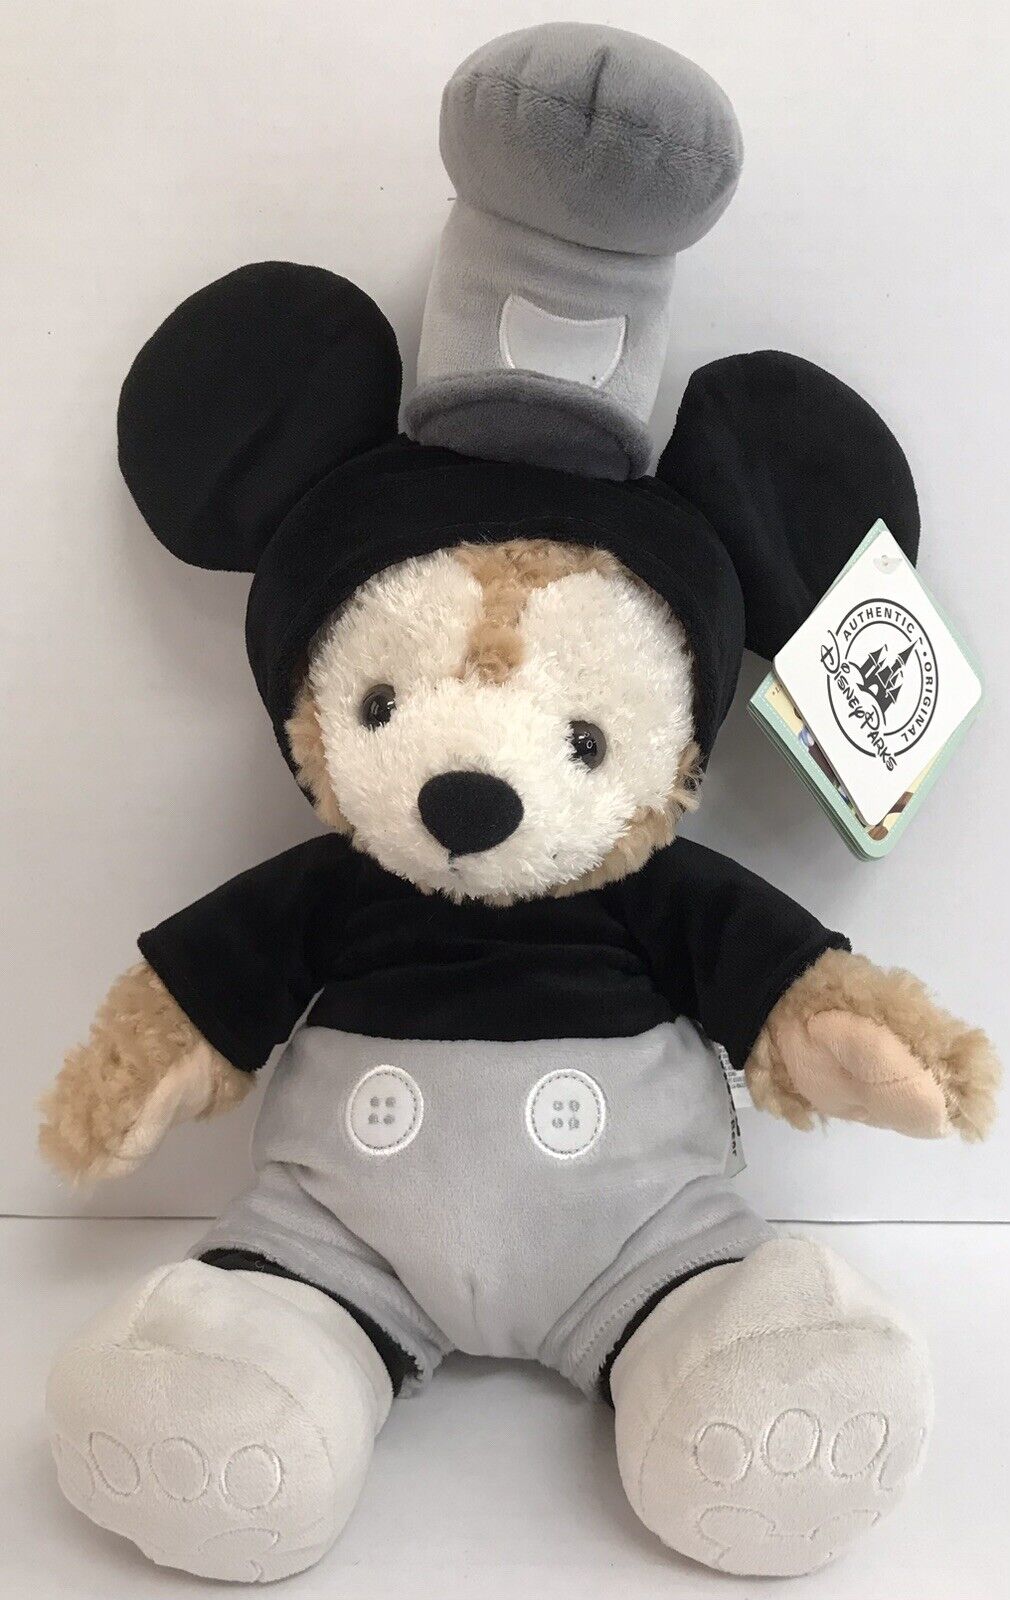 Disney Duffy the Bear Steamboat Willie Mickey Mouse Plush RARE Disney Parks NWT